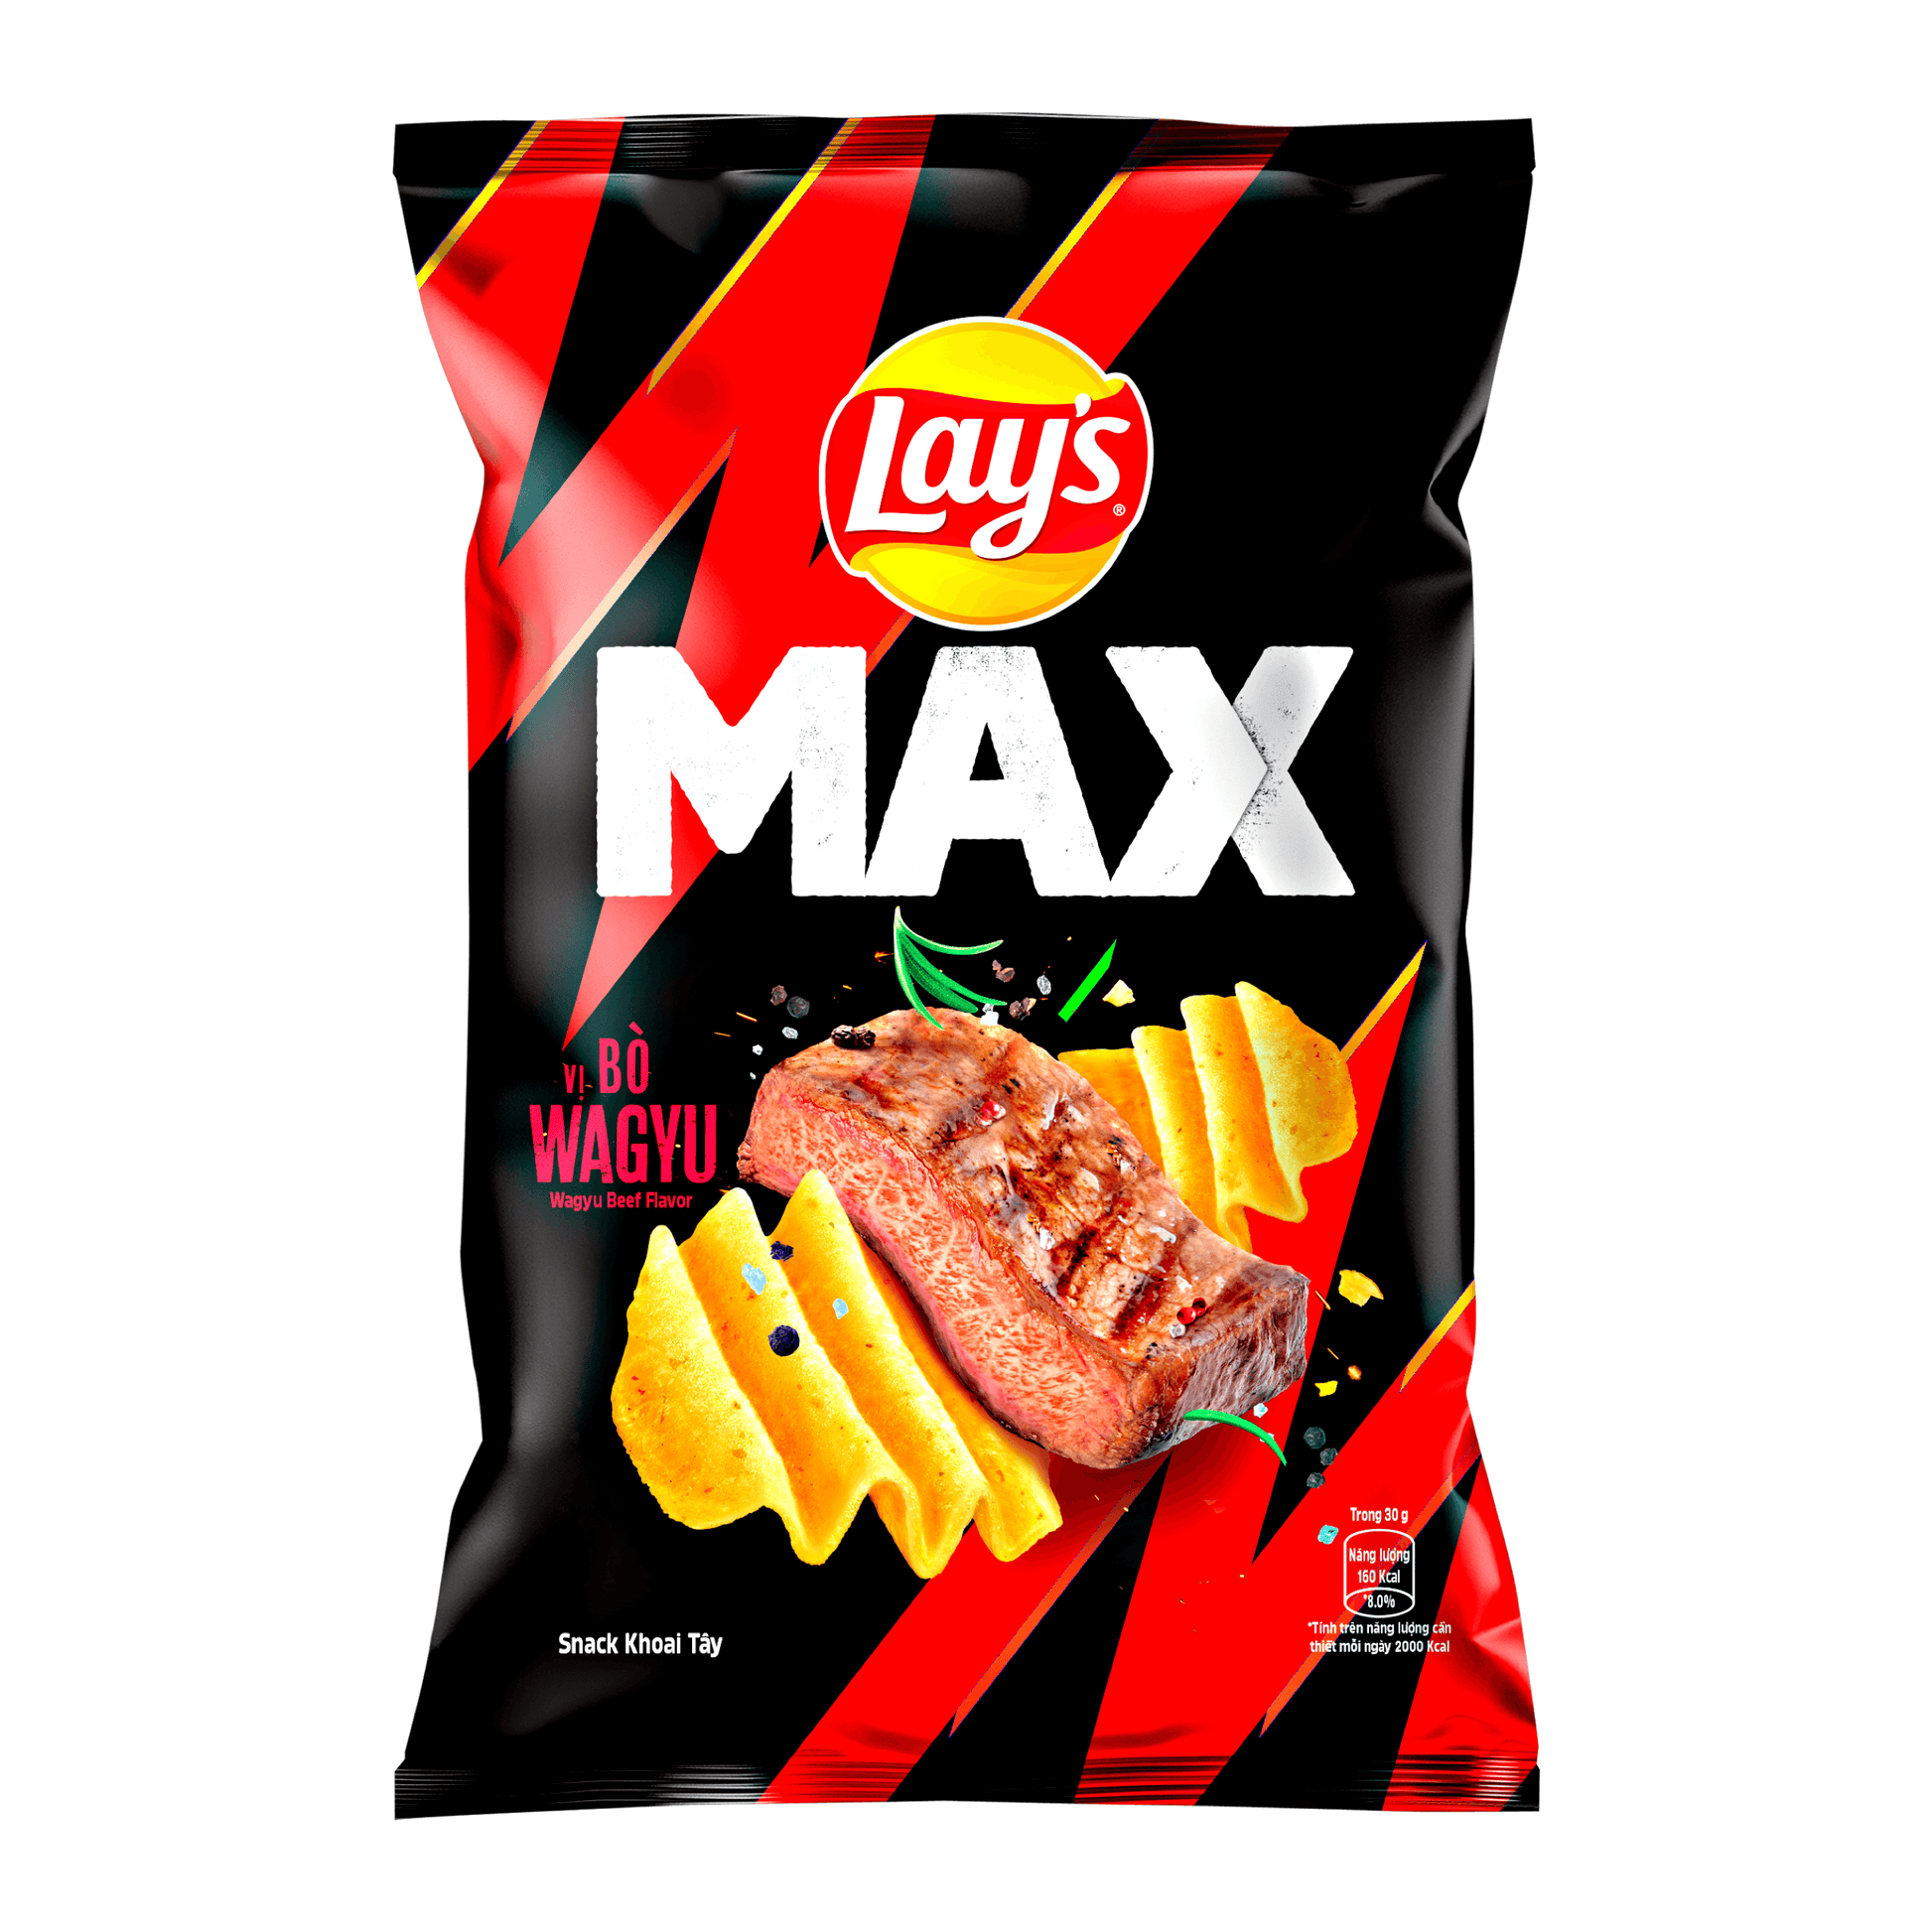 Lay’s Max Wagyu Beef Flavor Potato Chips 75g - The Snacks Box - Asian Snacks Store - The Snacks Box - Korean Snack - Japanese Snack